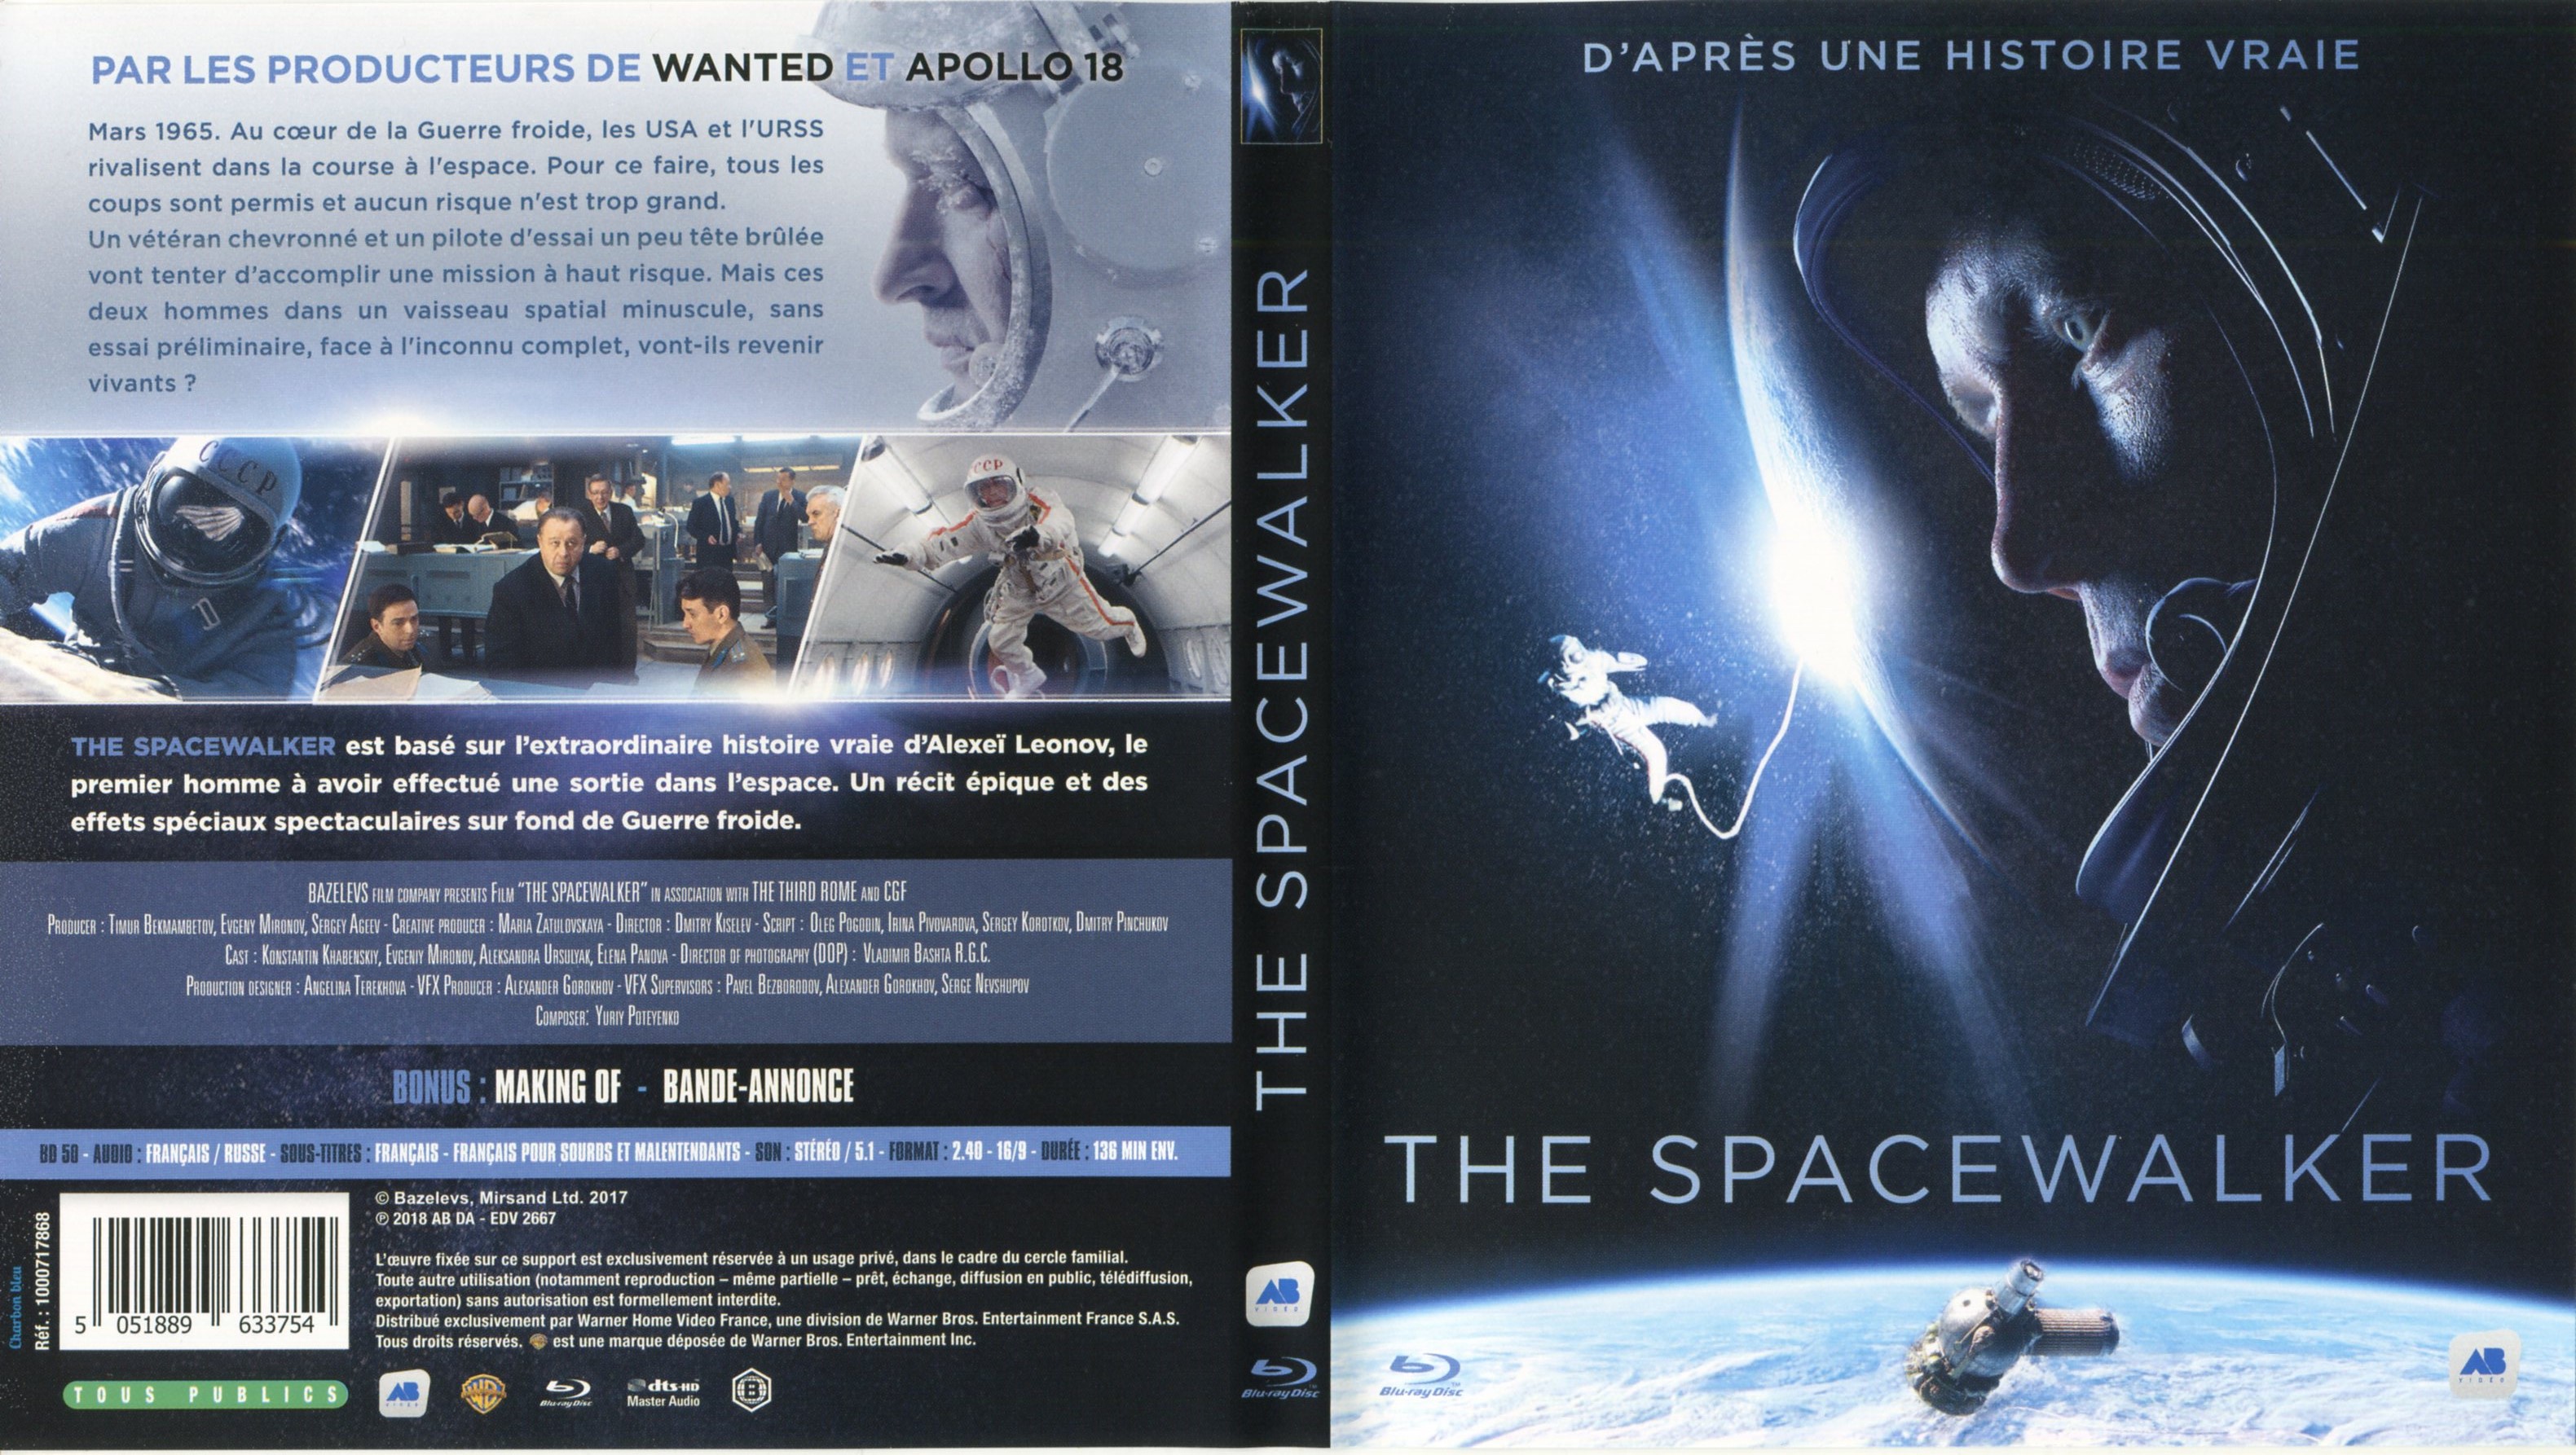 Jaquette DVD The spacewalker (BLU-RAY)